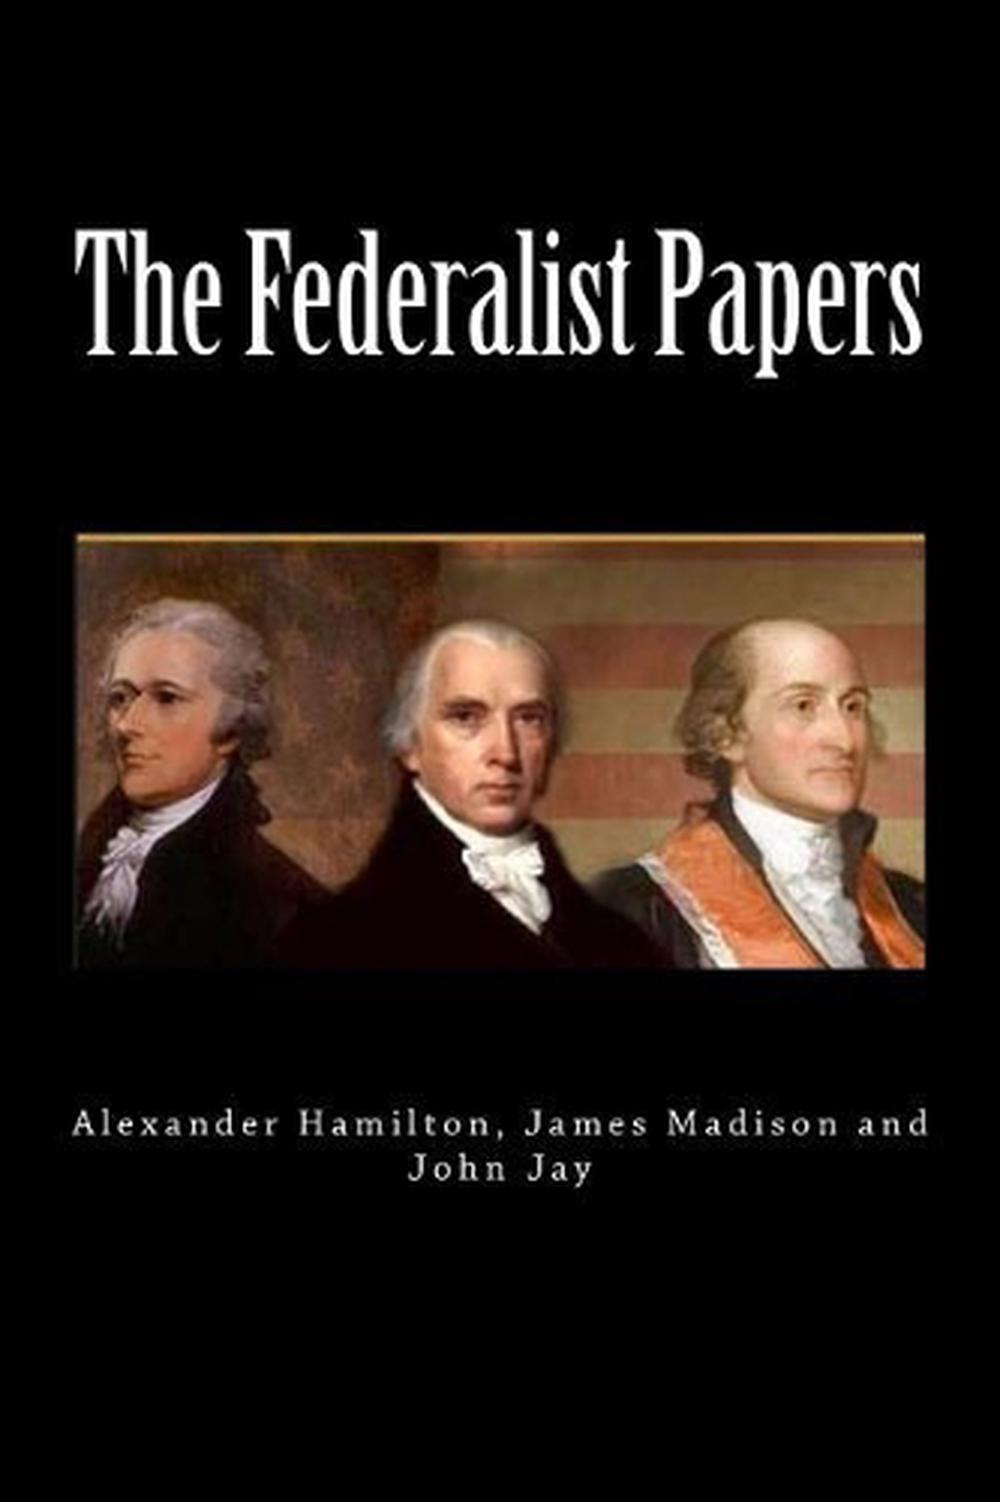 who wrote the 10th essay of the federalist papers